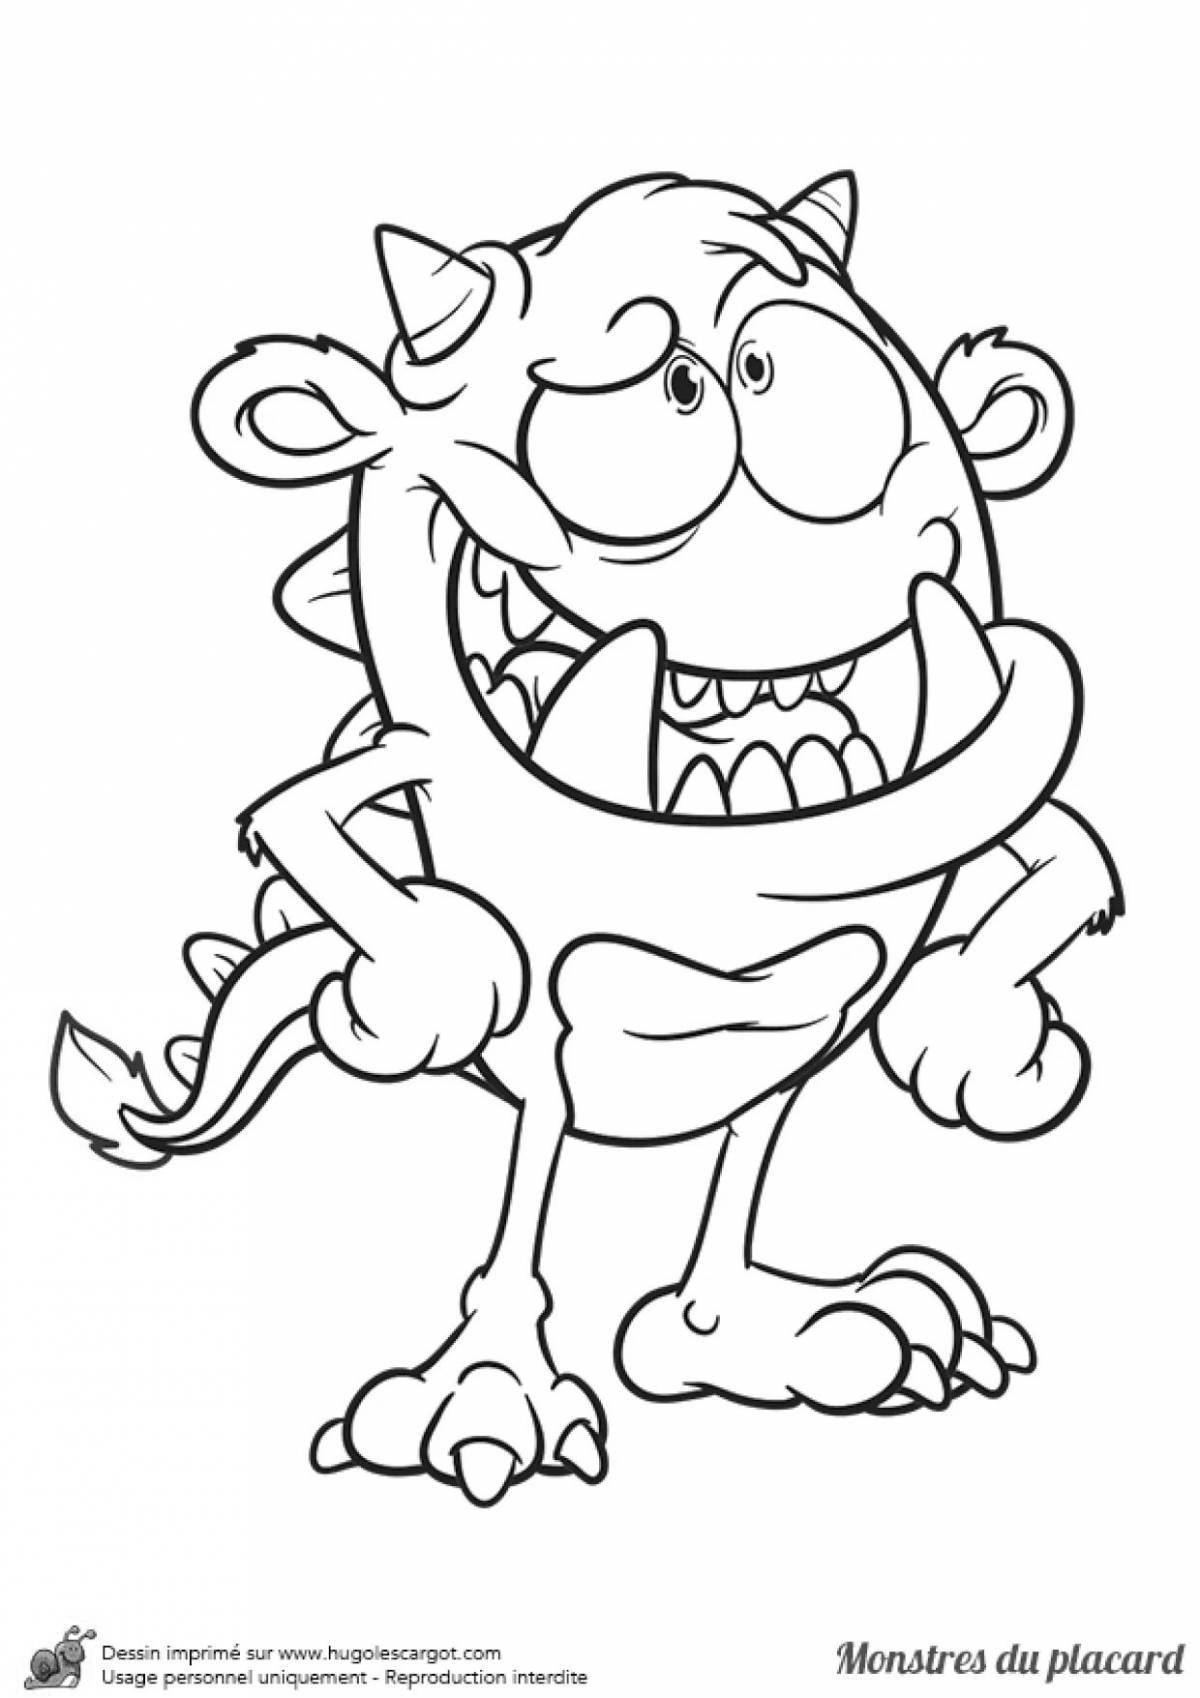 Cute monsters coloring pages for 6-7 year olds